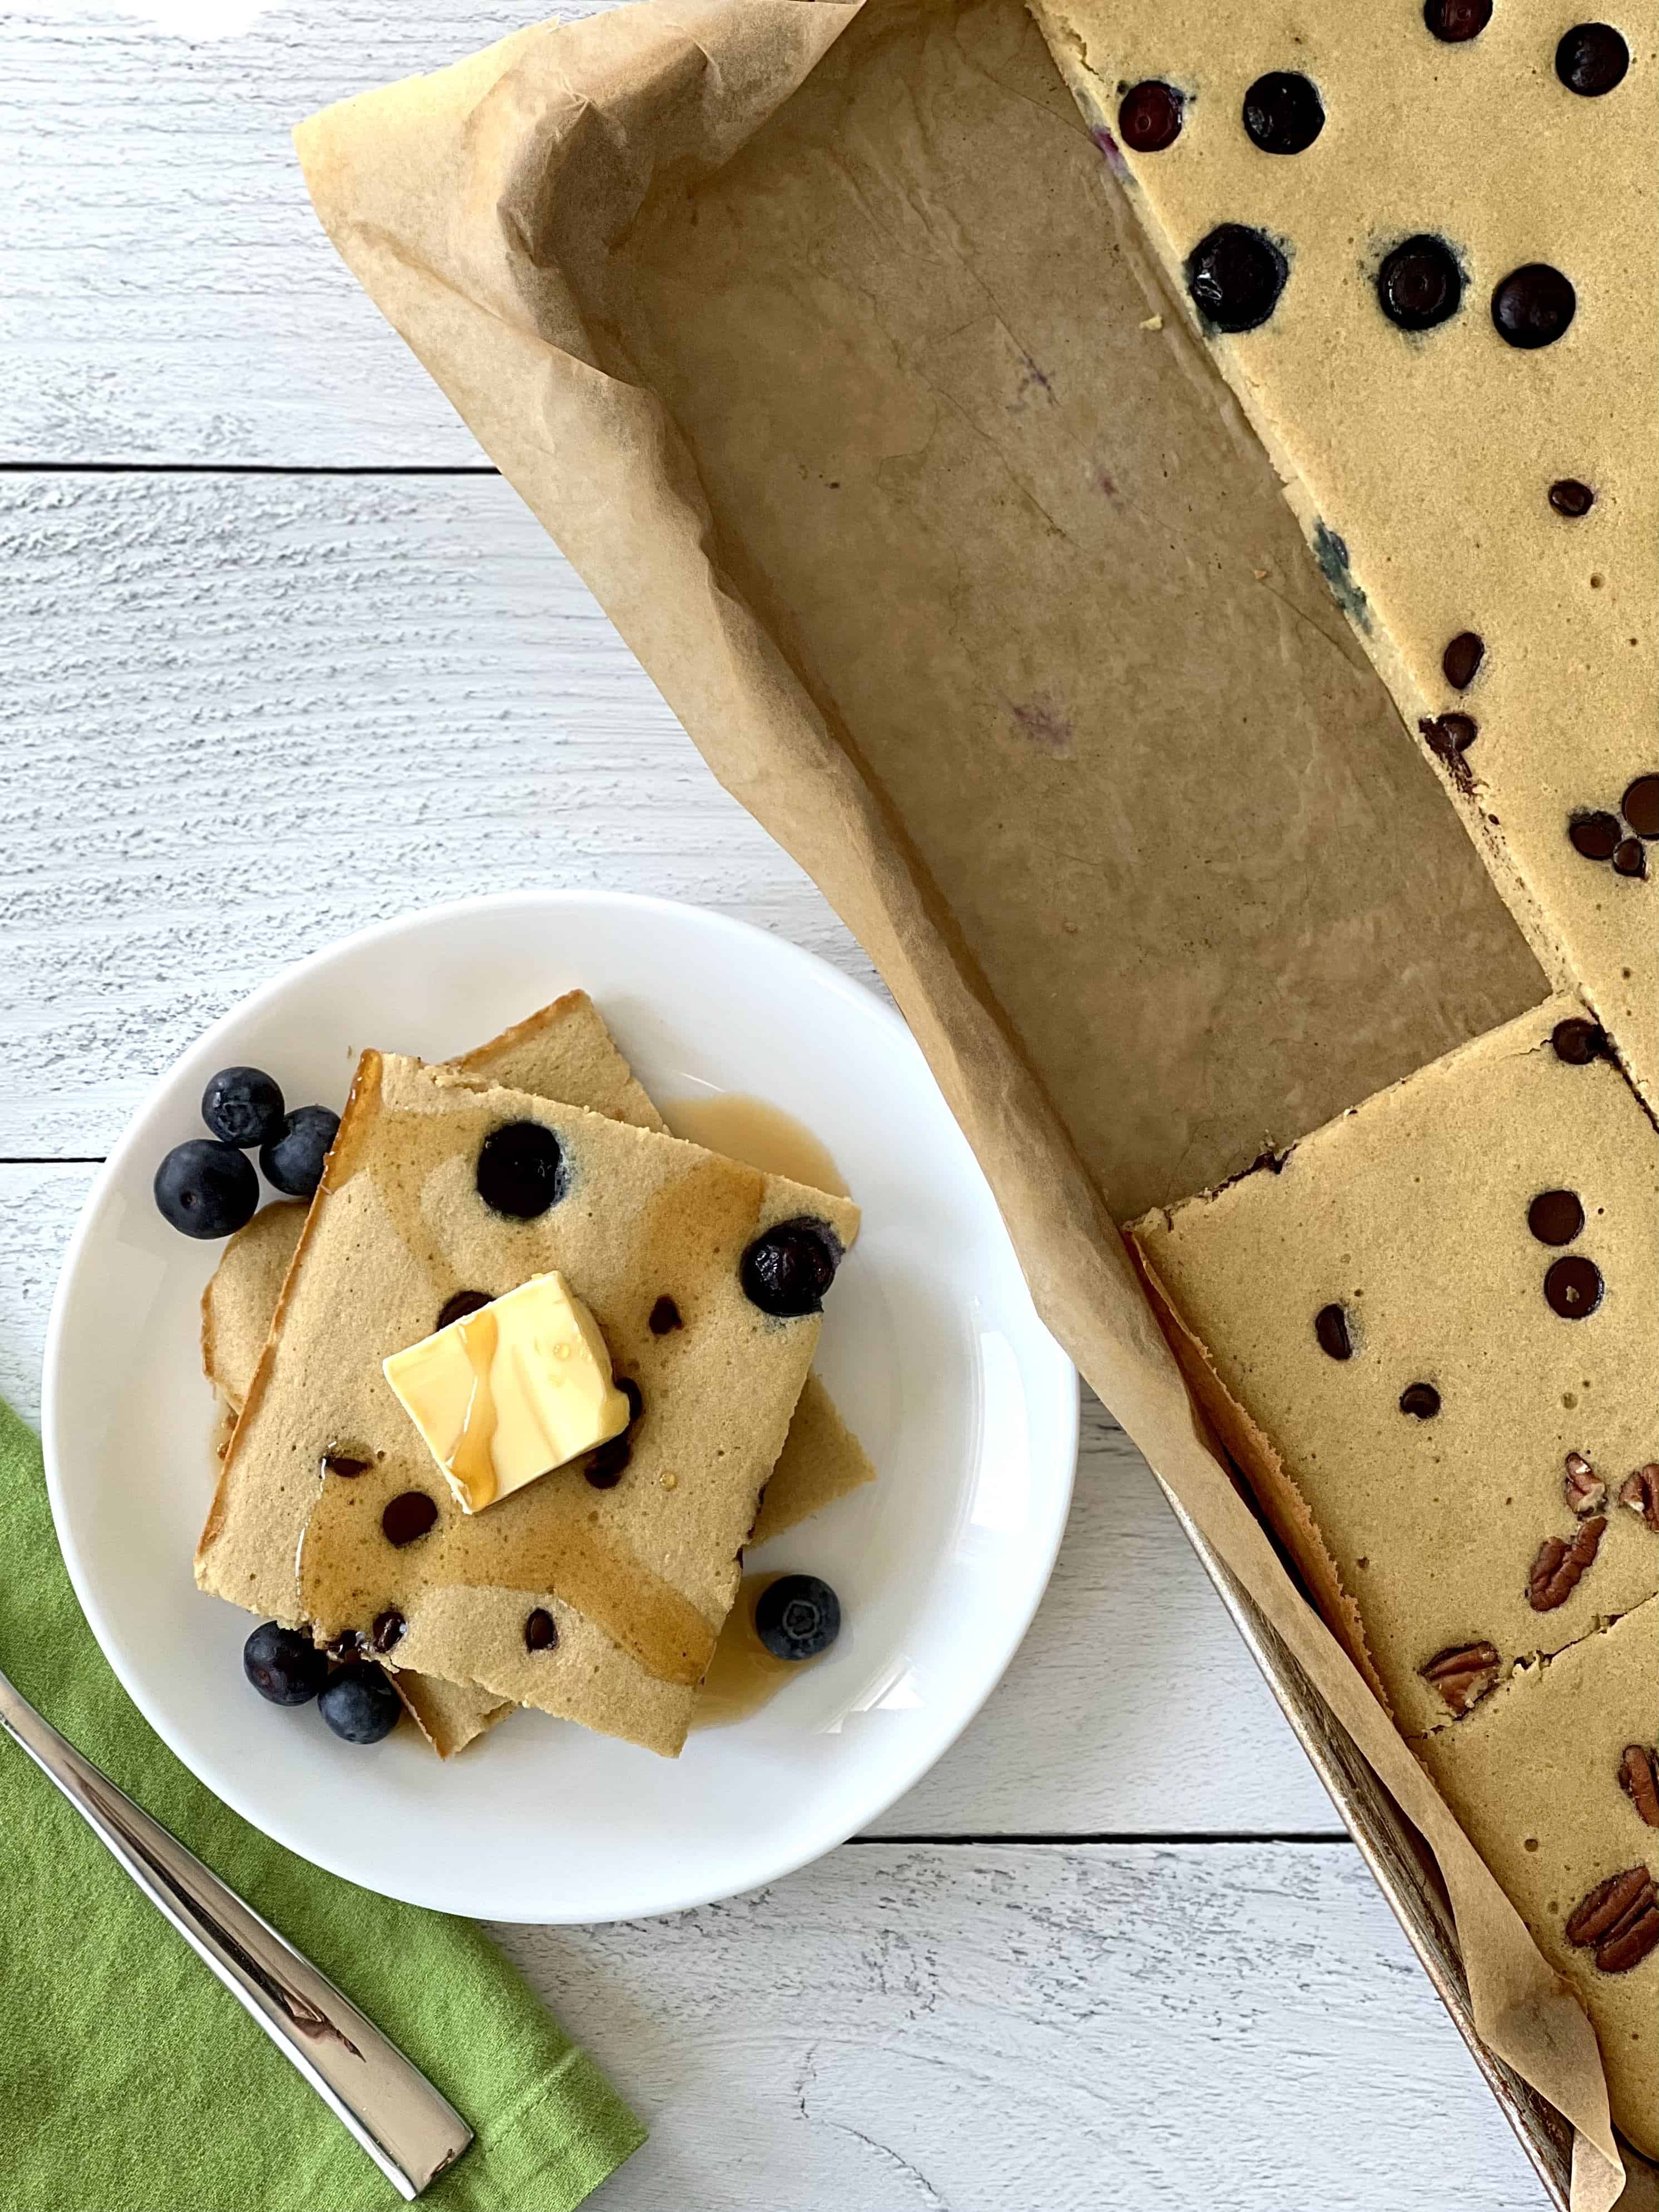 oven baked pancakes in a parchment-lined baking sheet topped with blueberries, chocolate chips and pecans, plus 2 square slices on a white plate topped with butter and maple syrup